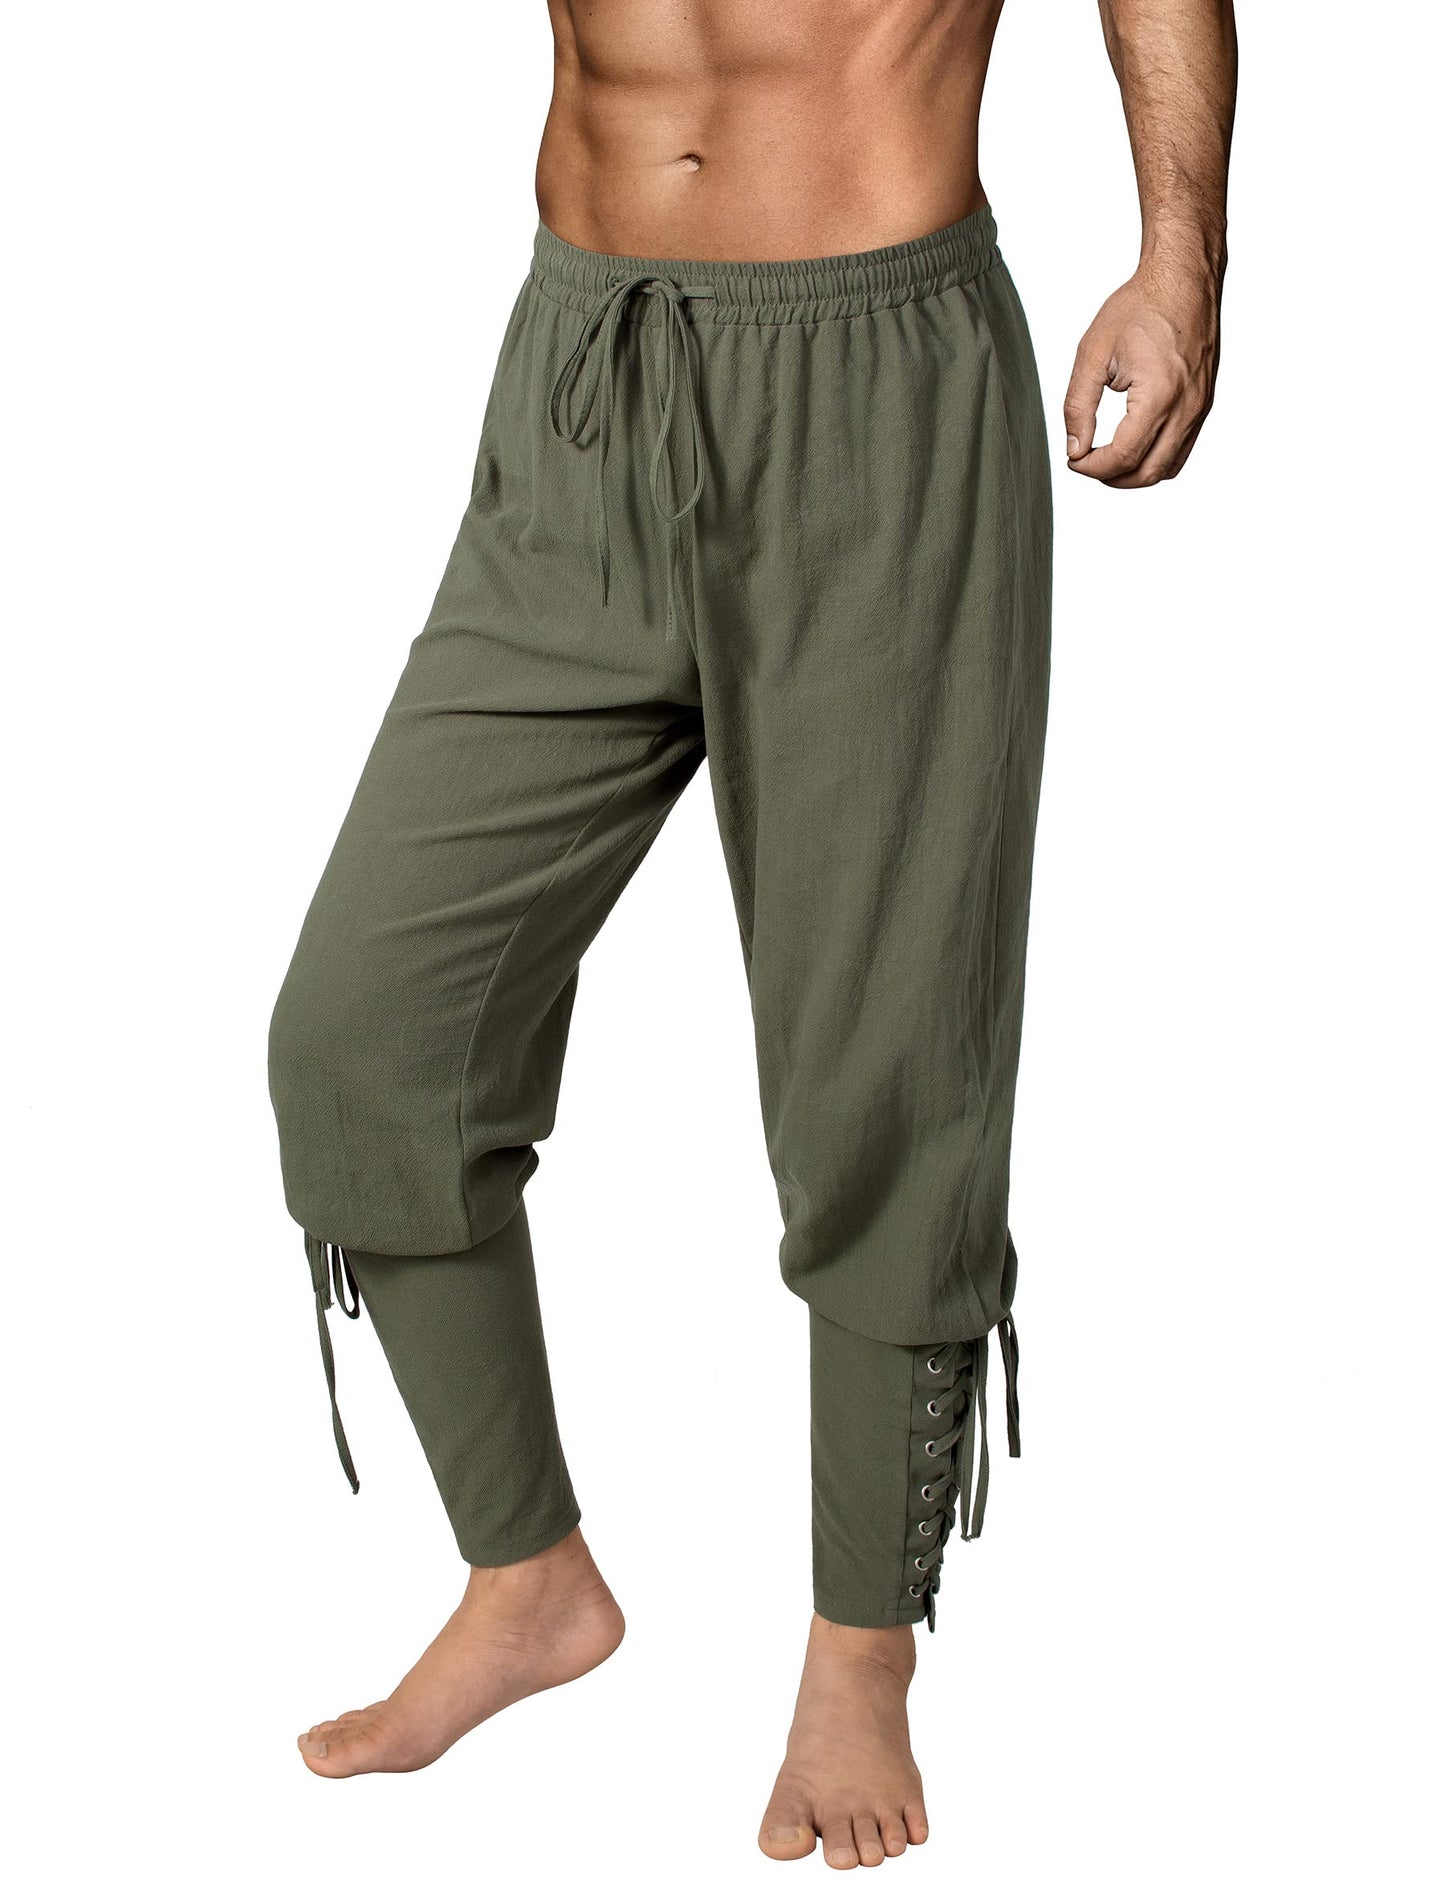 Men's Medieval Ankle Pants - Viking Pirate Renaissance Costume Trousers with Drawstrings & Banded Cuffs 28,29 Army Green